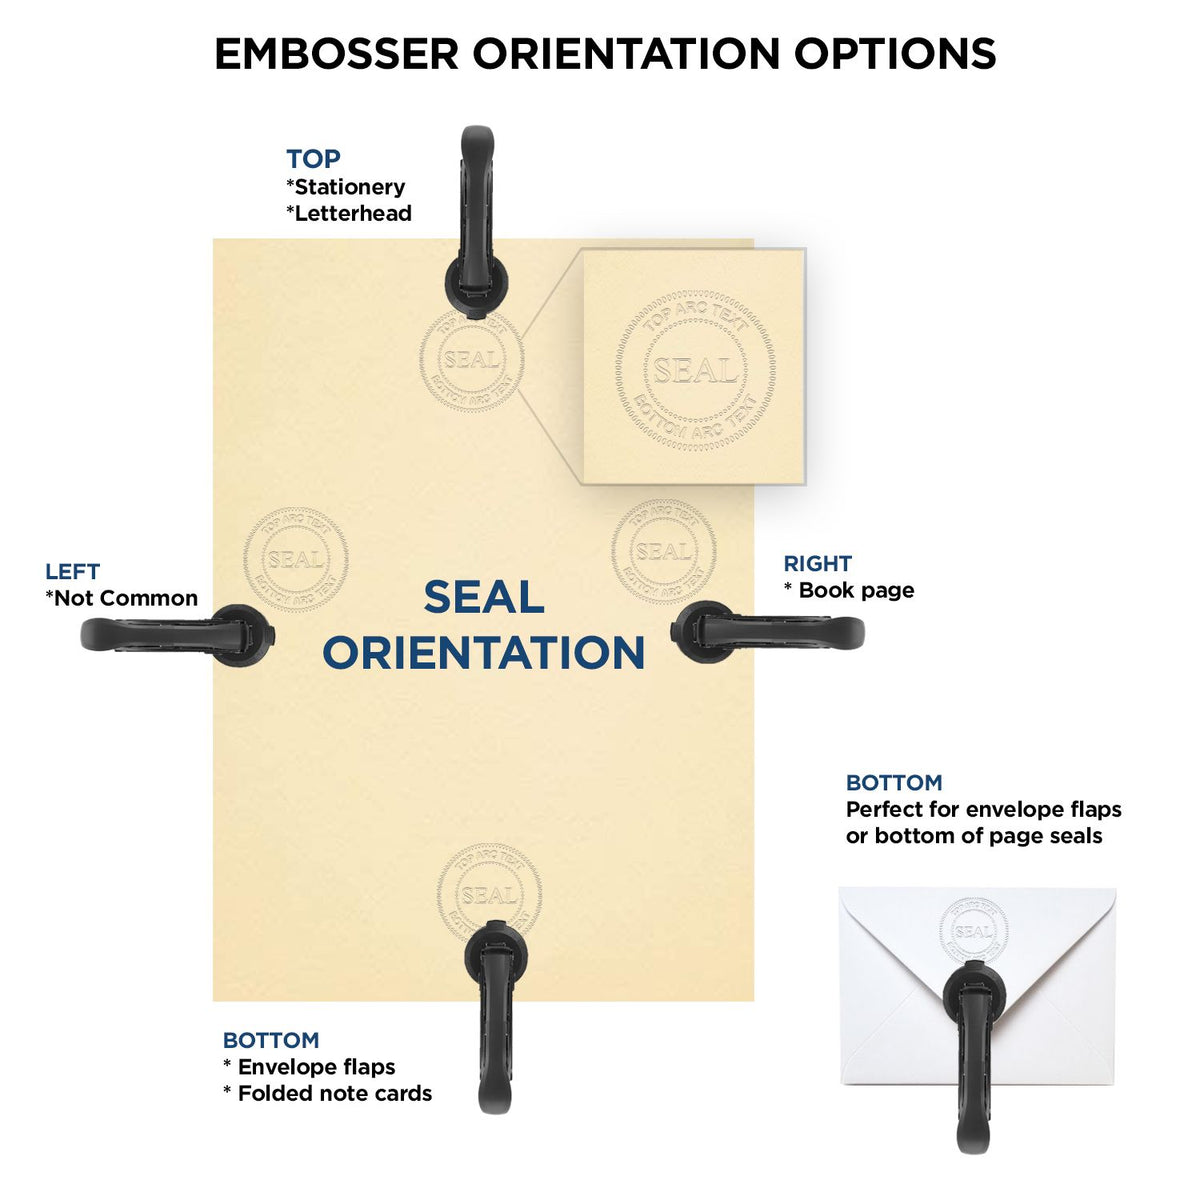 An infographic for the State of Texas Extended Long Reach Geologist Seal showing embosser orientation, this is showing examples of a top, bottom, right and left insert.